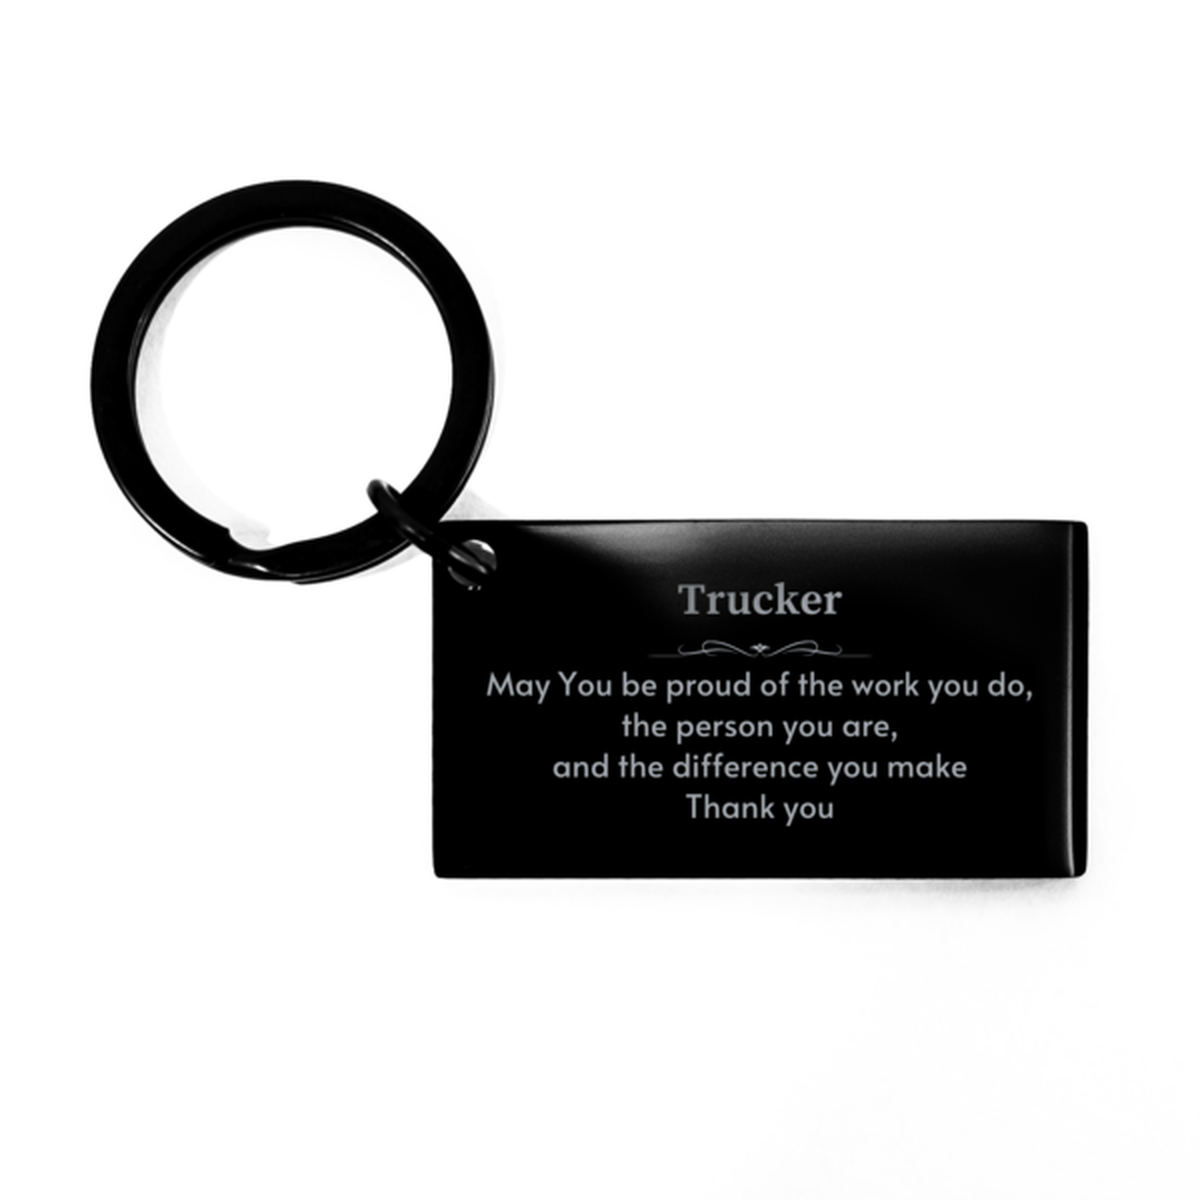 Heartwarming Keychain Retirement Coworkers Gifts for Trucker, Banker May You be proud of the work you do, the person you are Gifts for Boss Men Women Friends